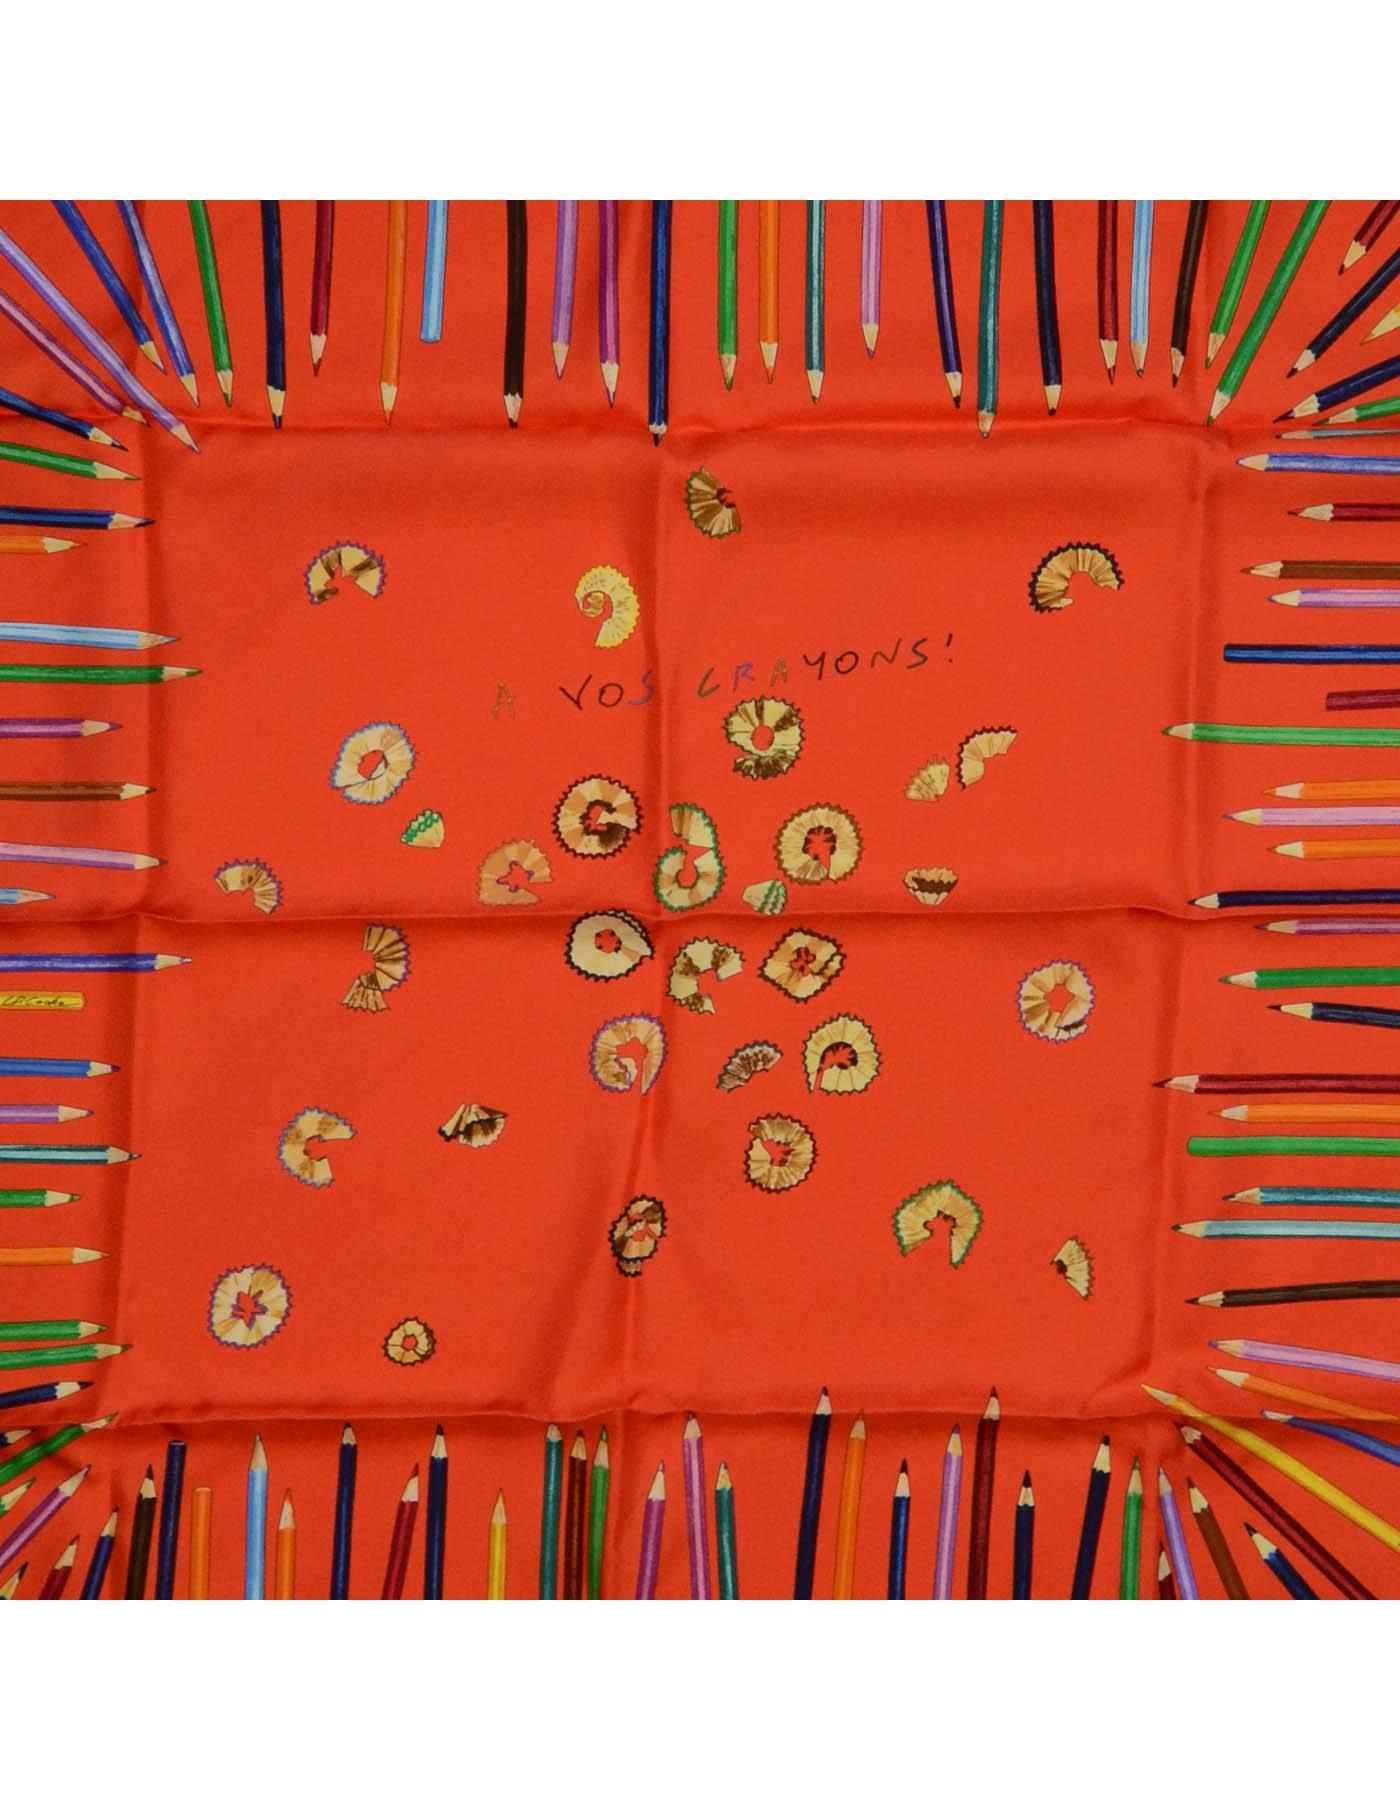 Hermes Orange 'A Vos Crayons!' Silk 90cm Scarf
Print features different colored pencils surrounding pencil shavings. Designed by artist Leigh Cooke

    Made in: France
    Color: Orange with multicolored pencils
    Composition: 100% Silk
   